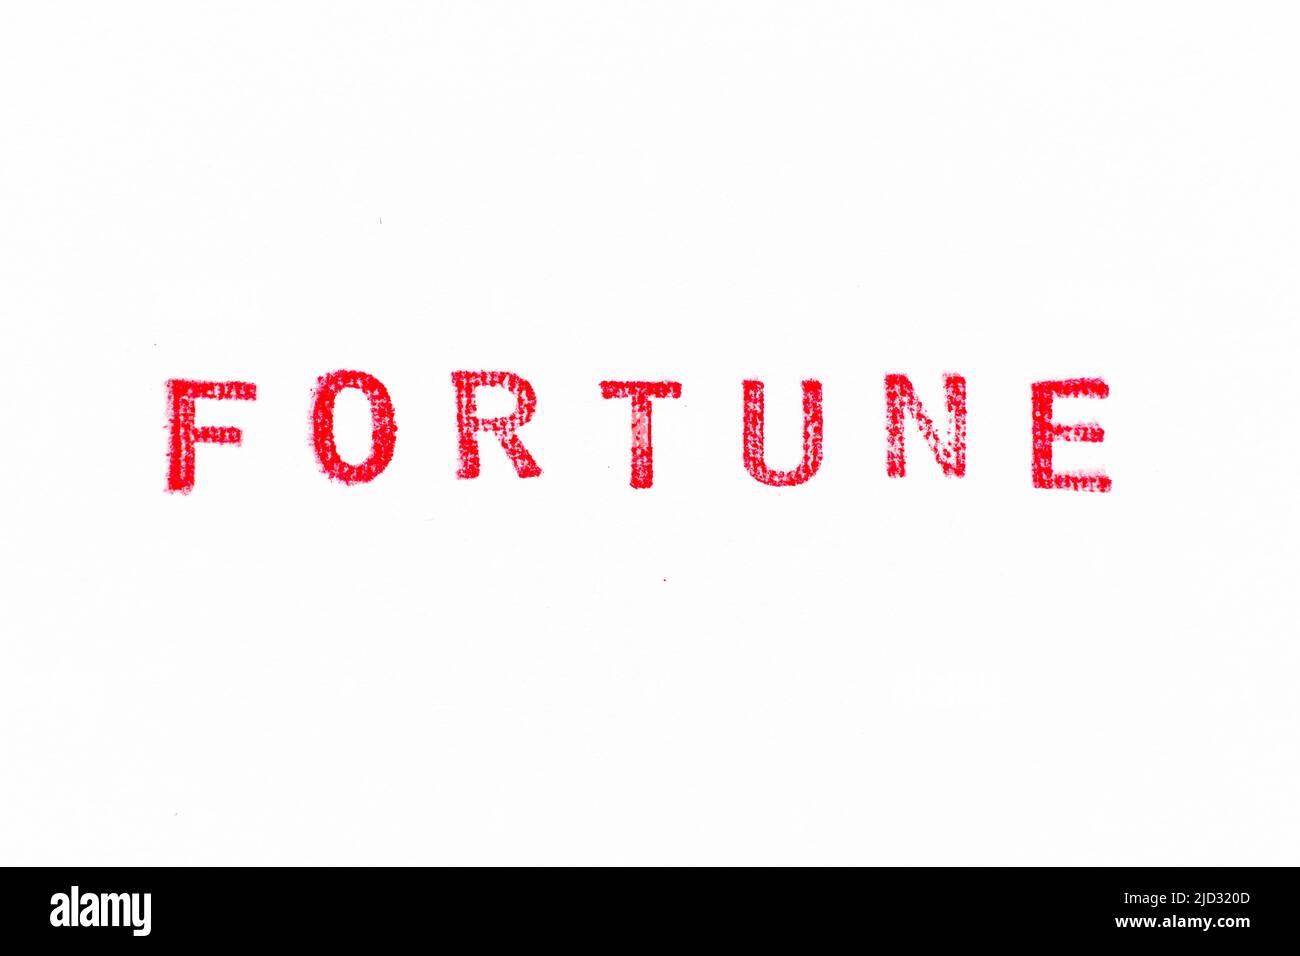 Red color rubber stamp in word fortune on white paper background Stock Photo